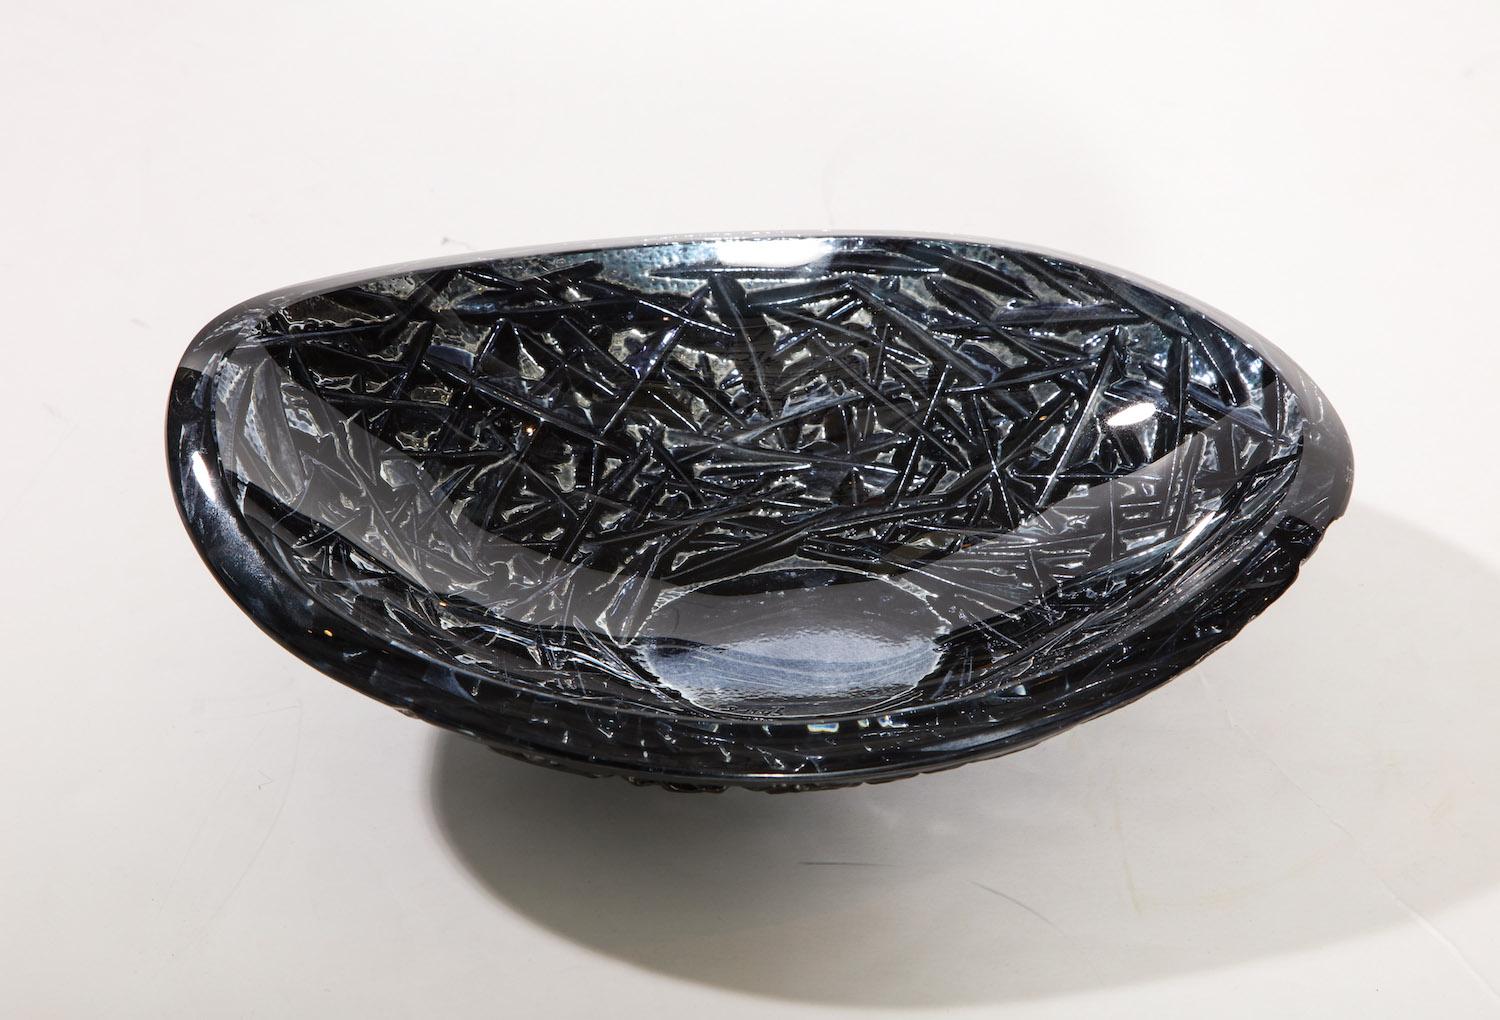 Studio-Made Carved Glass Dish by Ghiró Studio, Medium 1